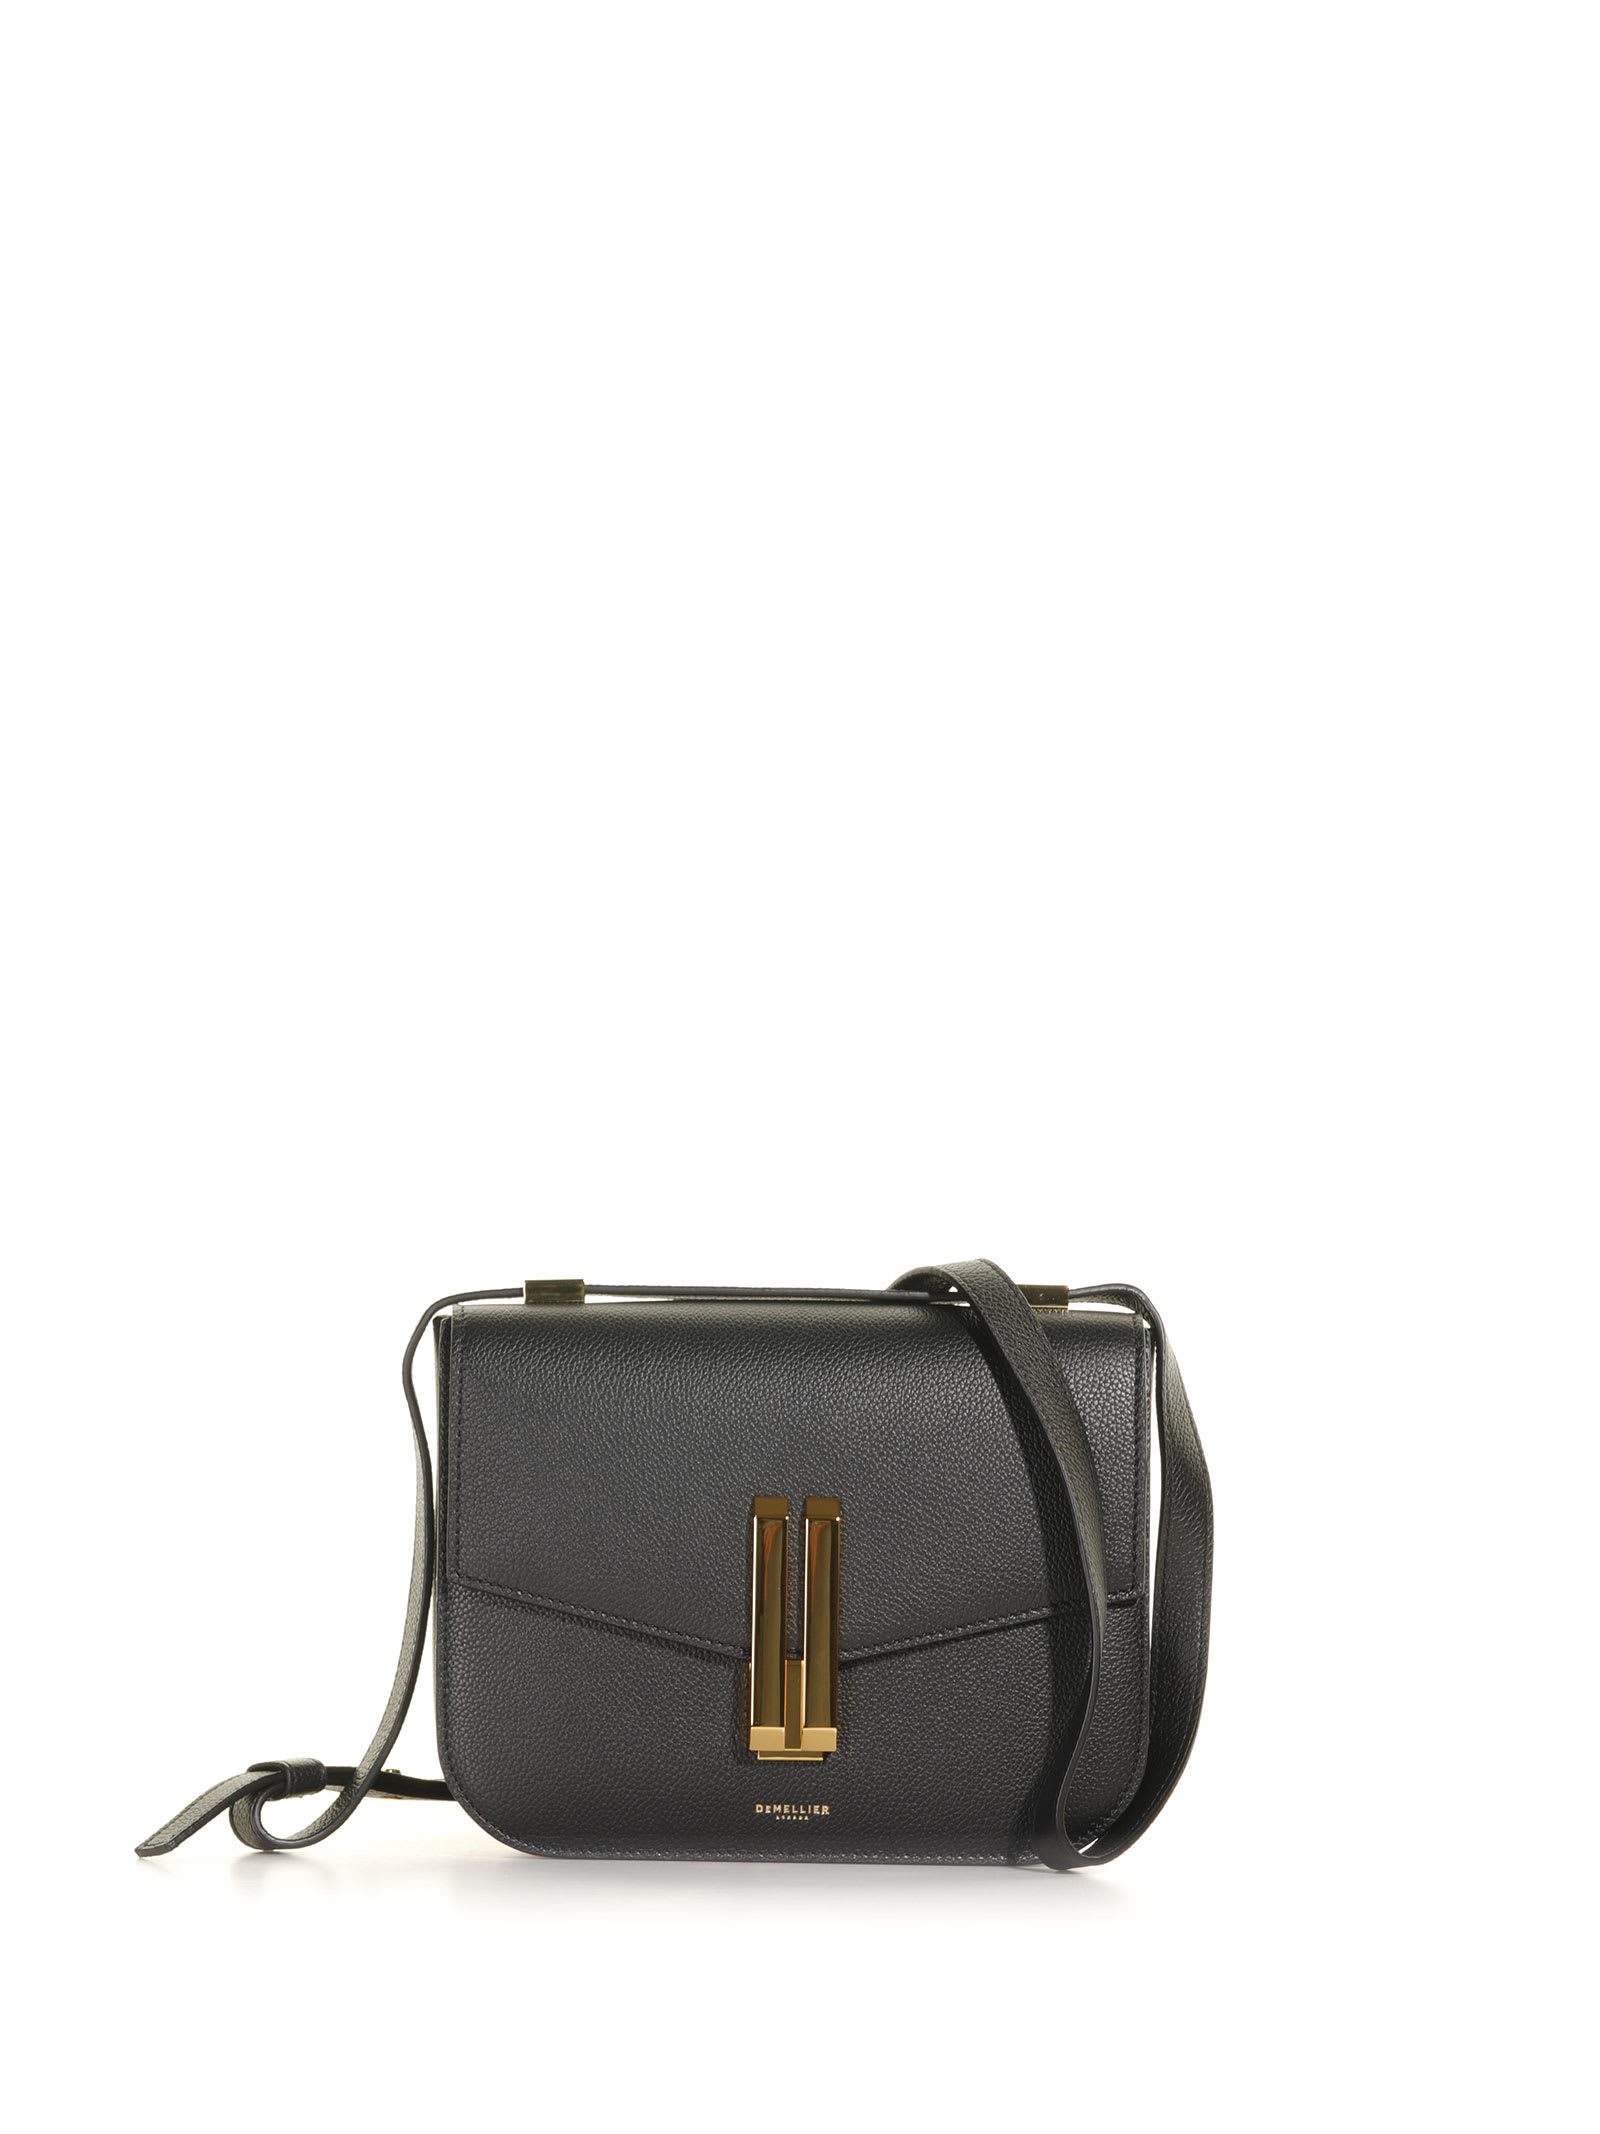 Demellier Women's Small Vancouver Leather Crossbody Bag